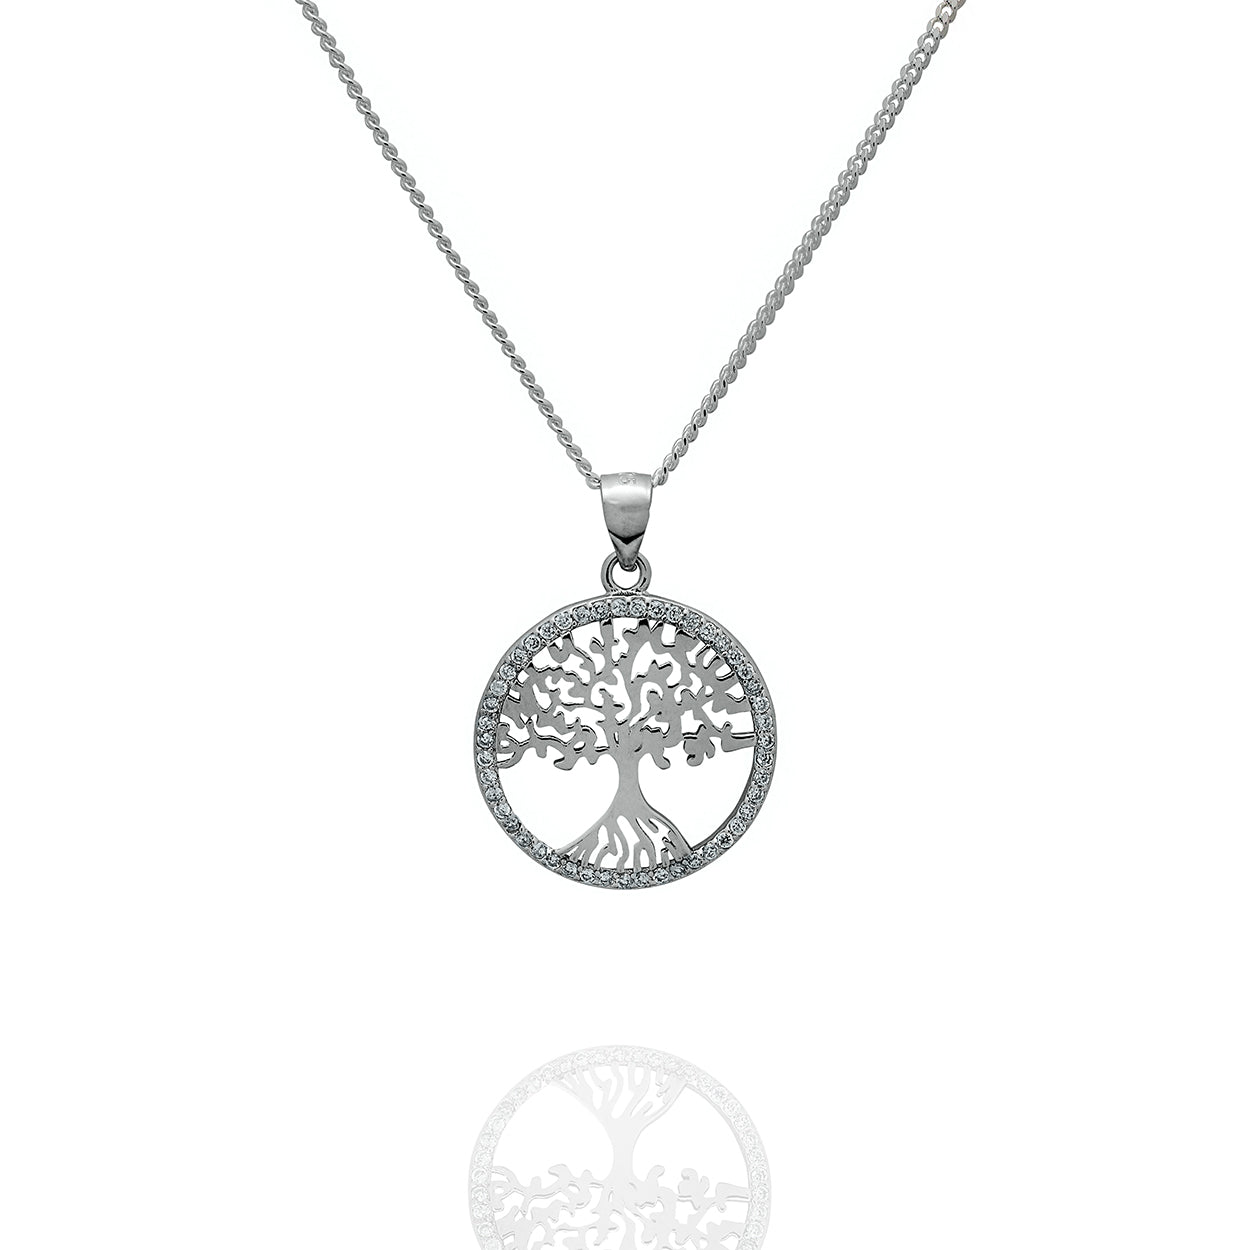 Sterling Silver Tree of Life Pendant set with Cubic Zirconia around the tree